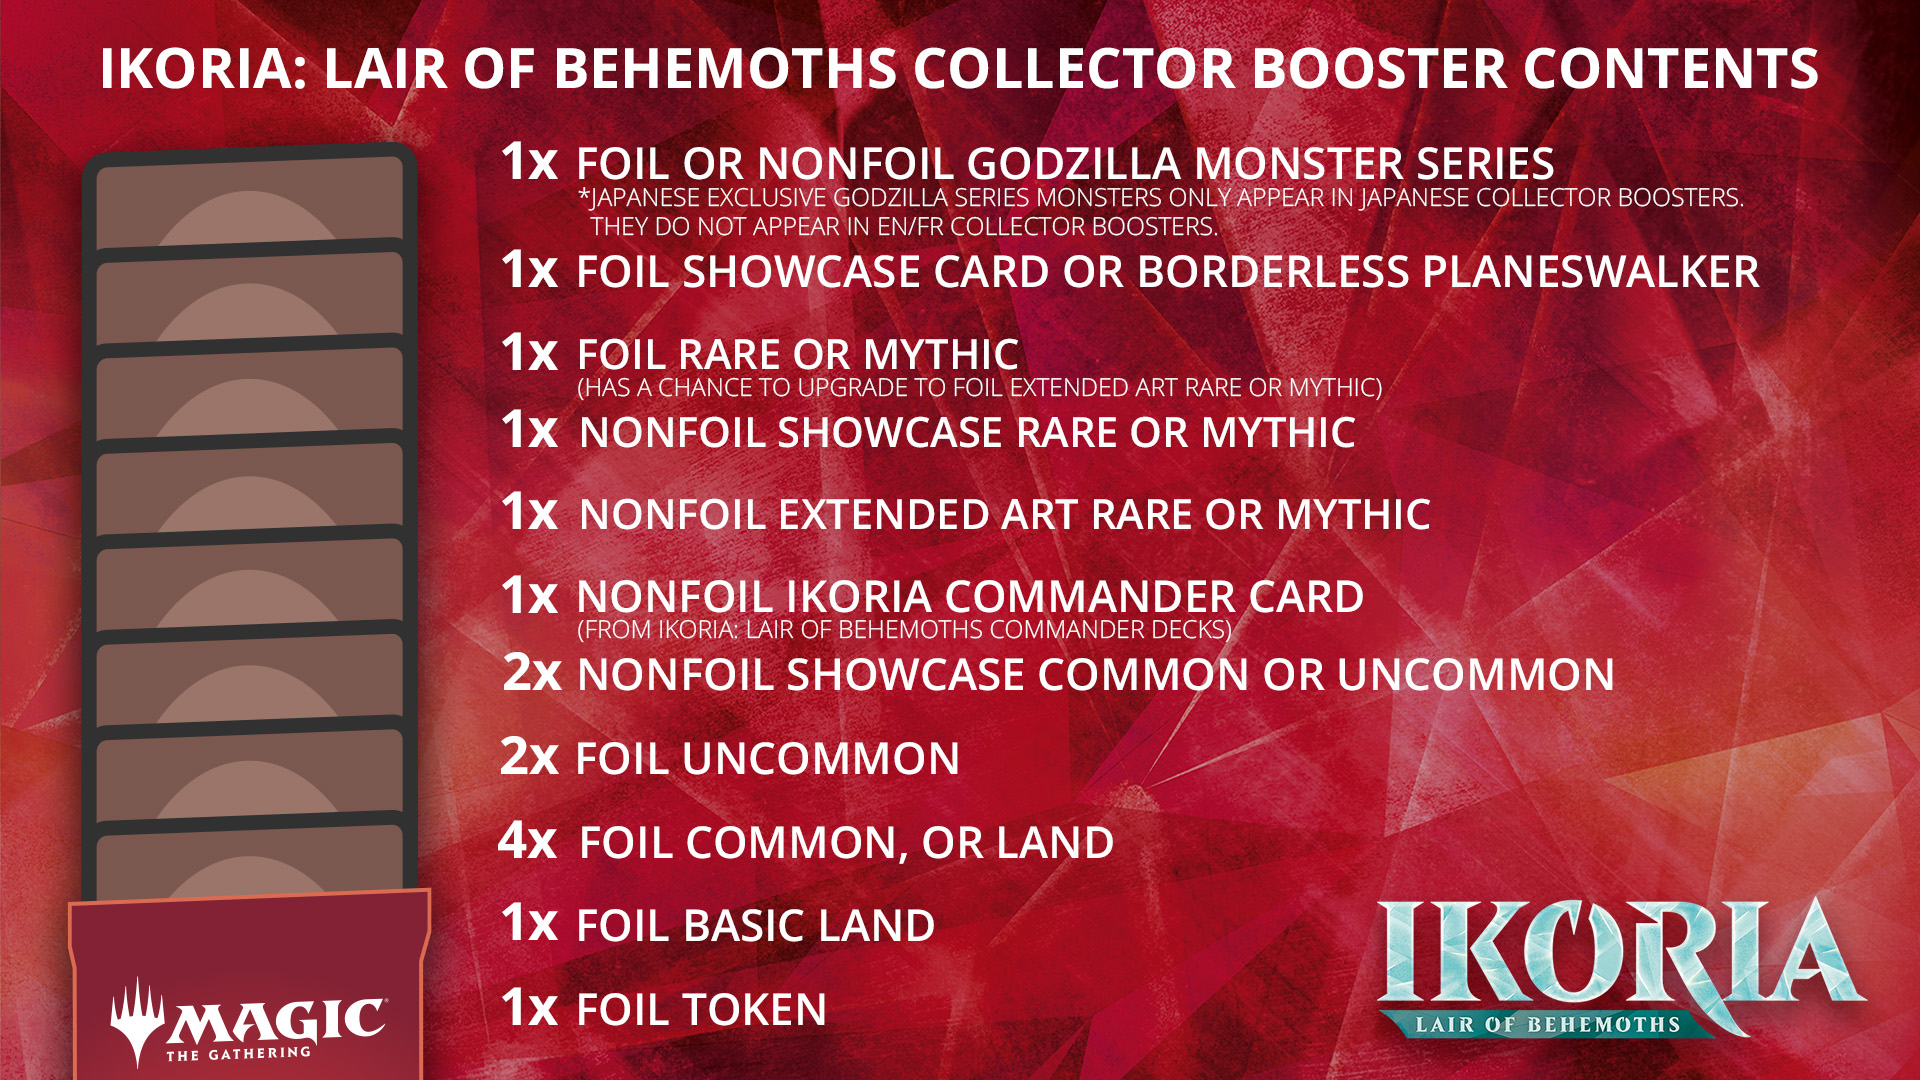 Collector Booster info